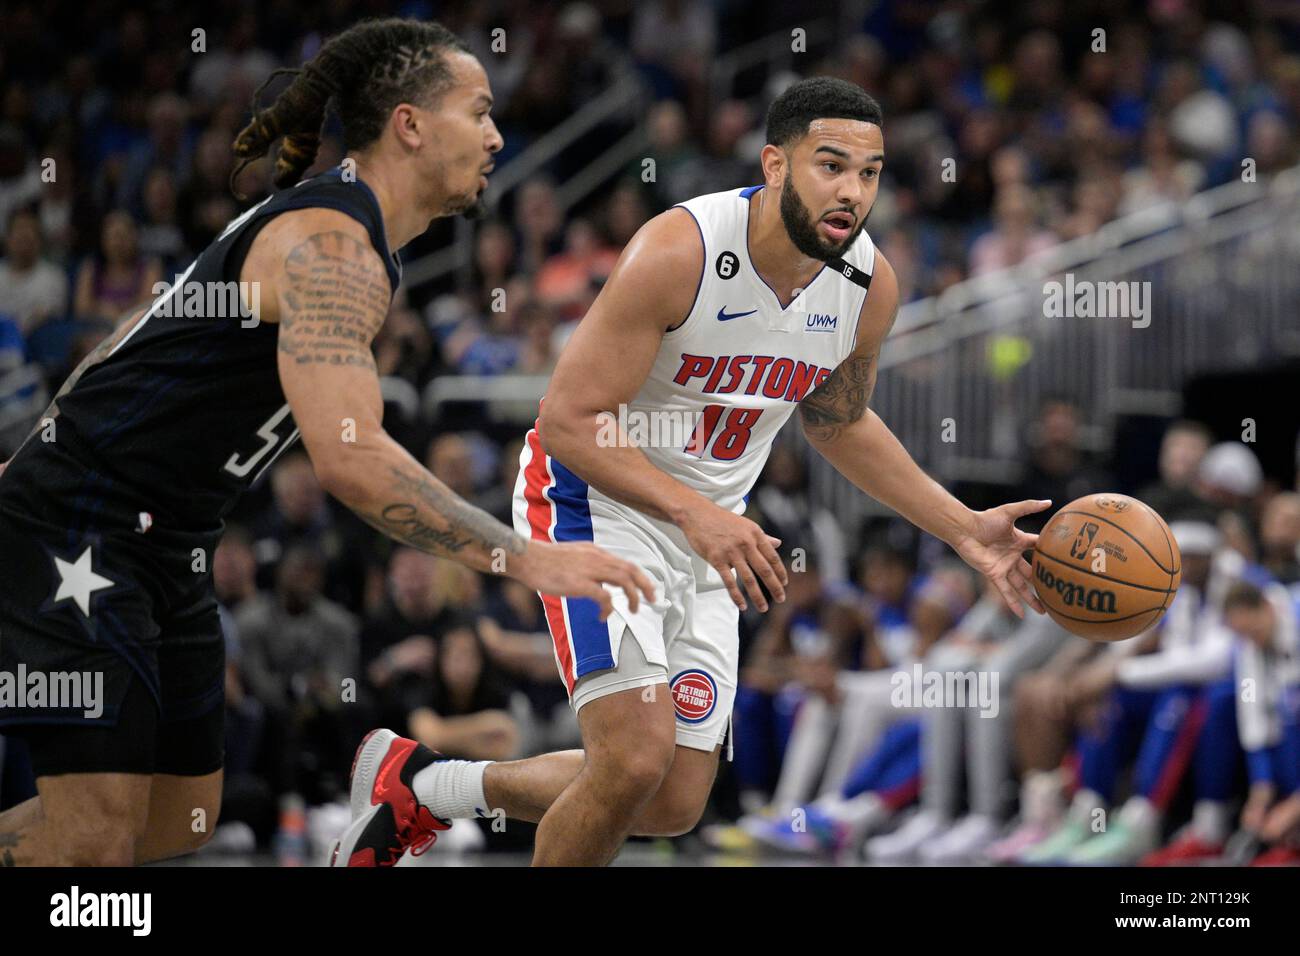 Detroit Pistons guard Cory Joseph (18) during the second half of